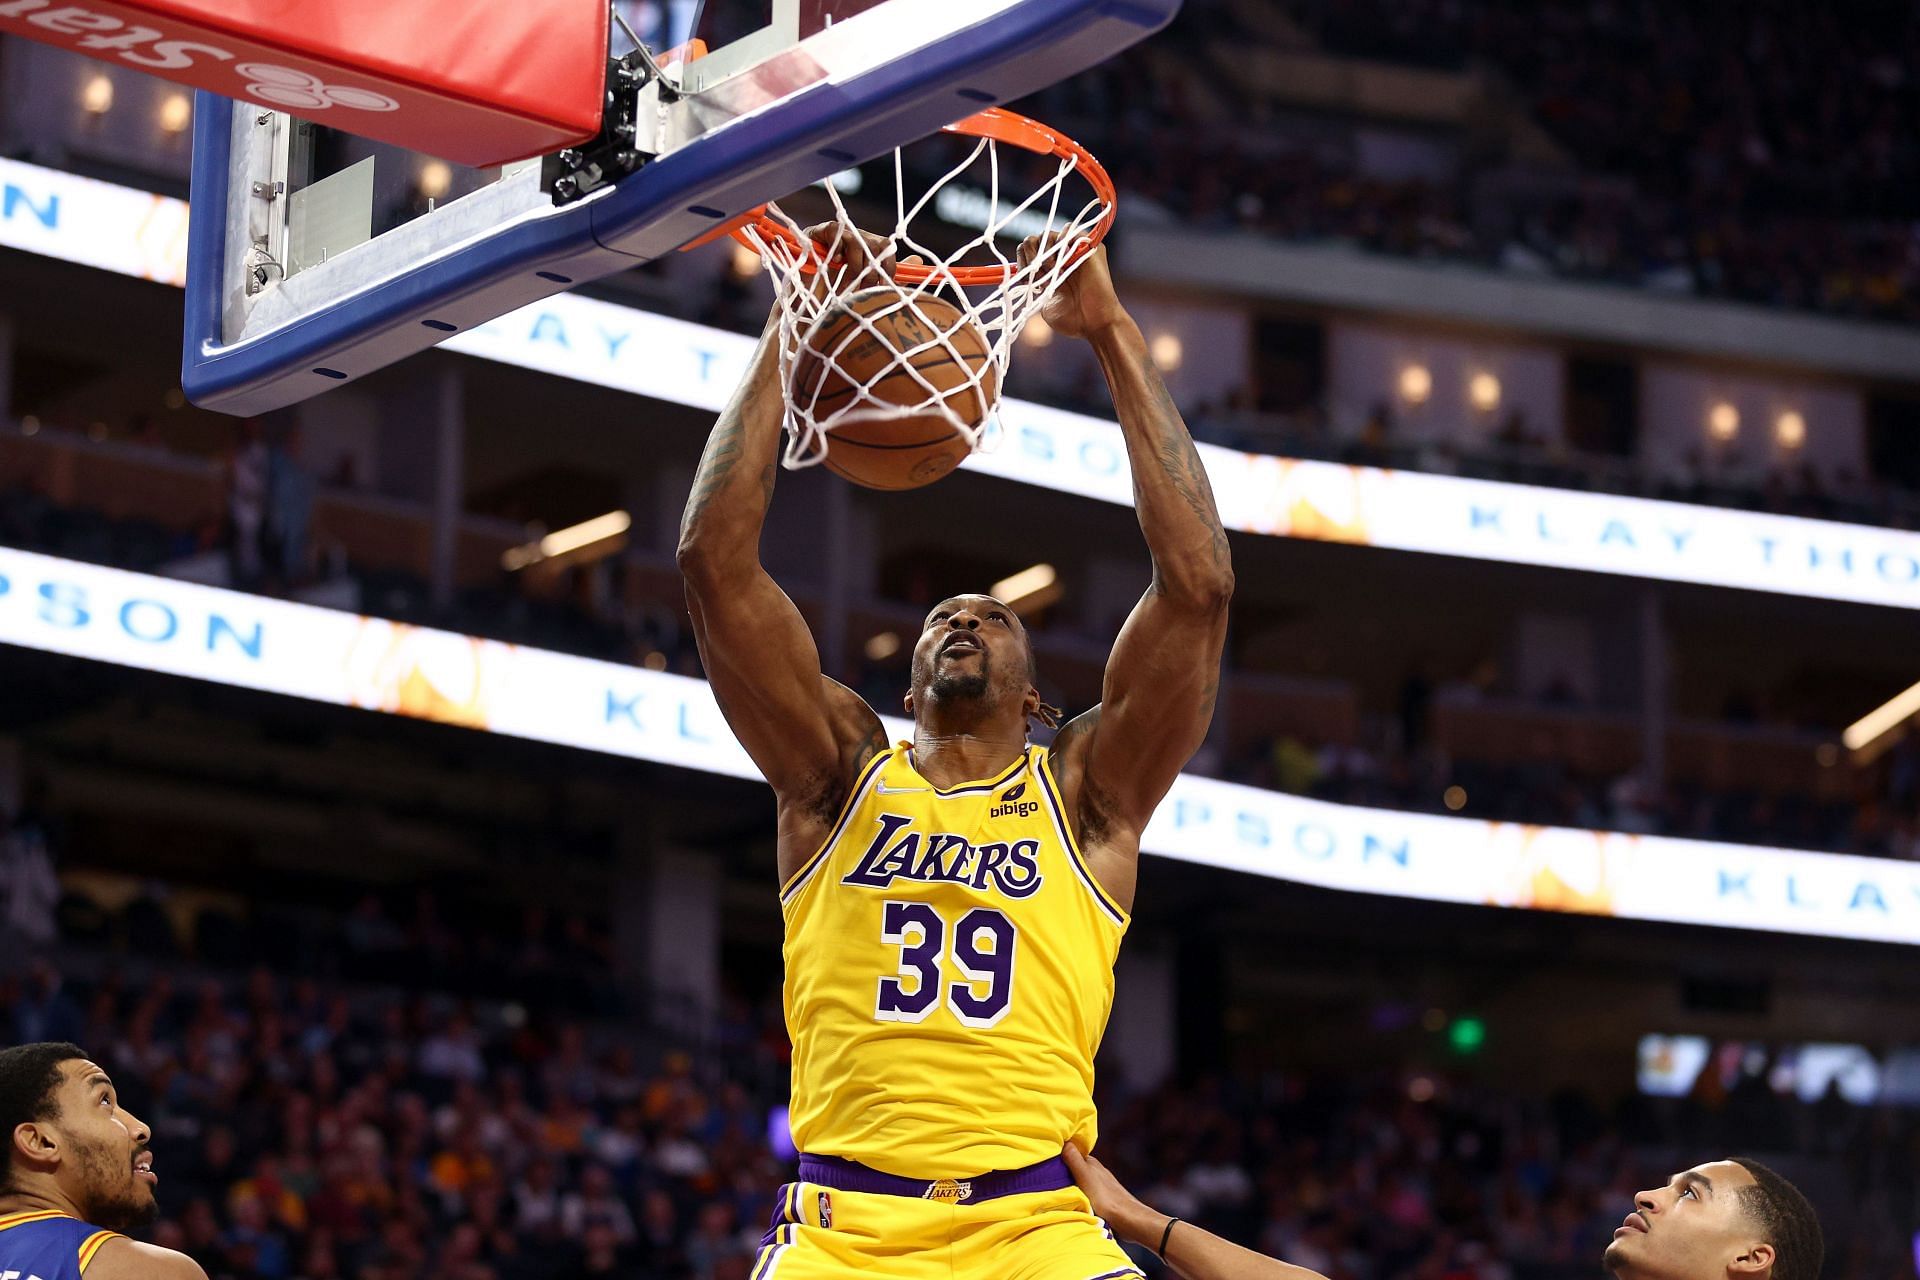 Dwight Howard last played for the LA Lakers in the NBA.